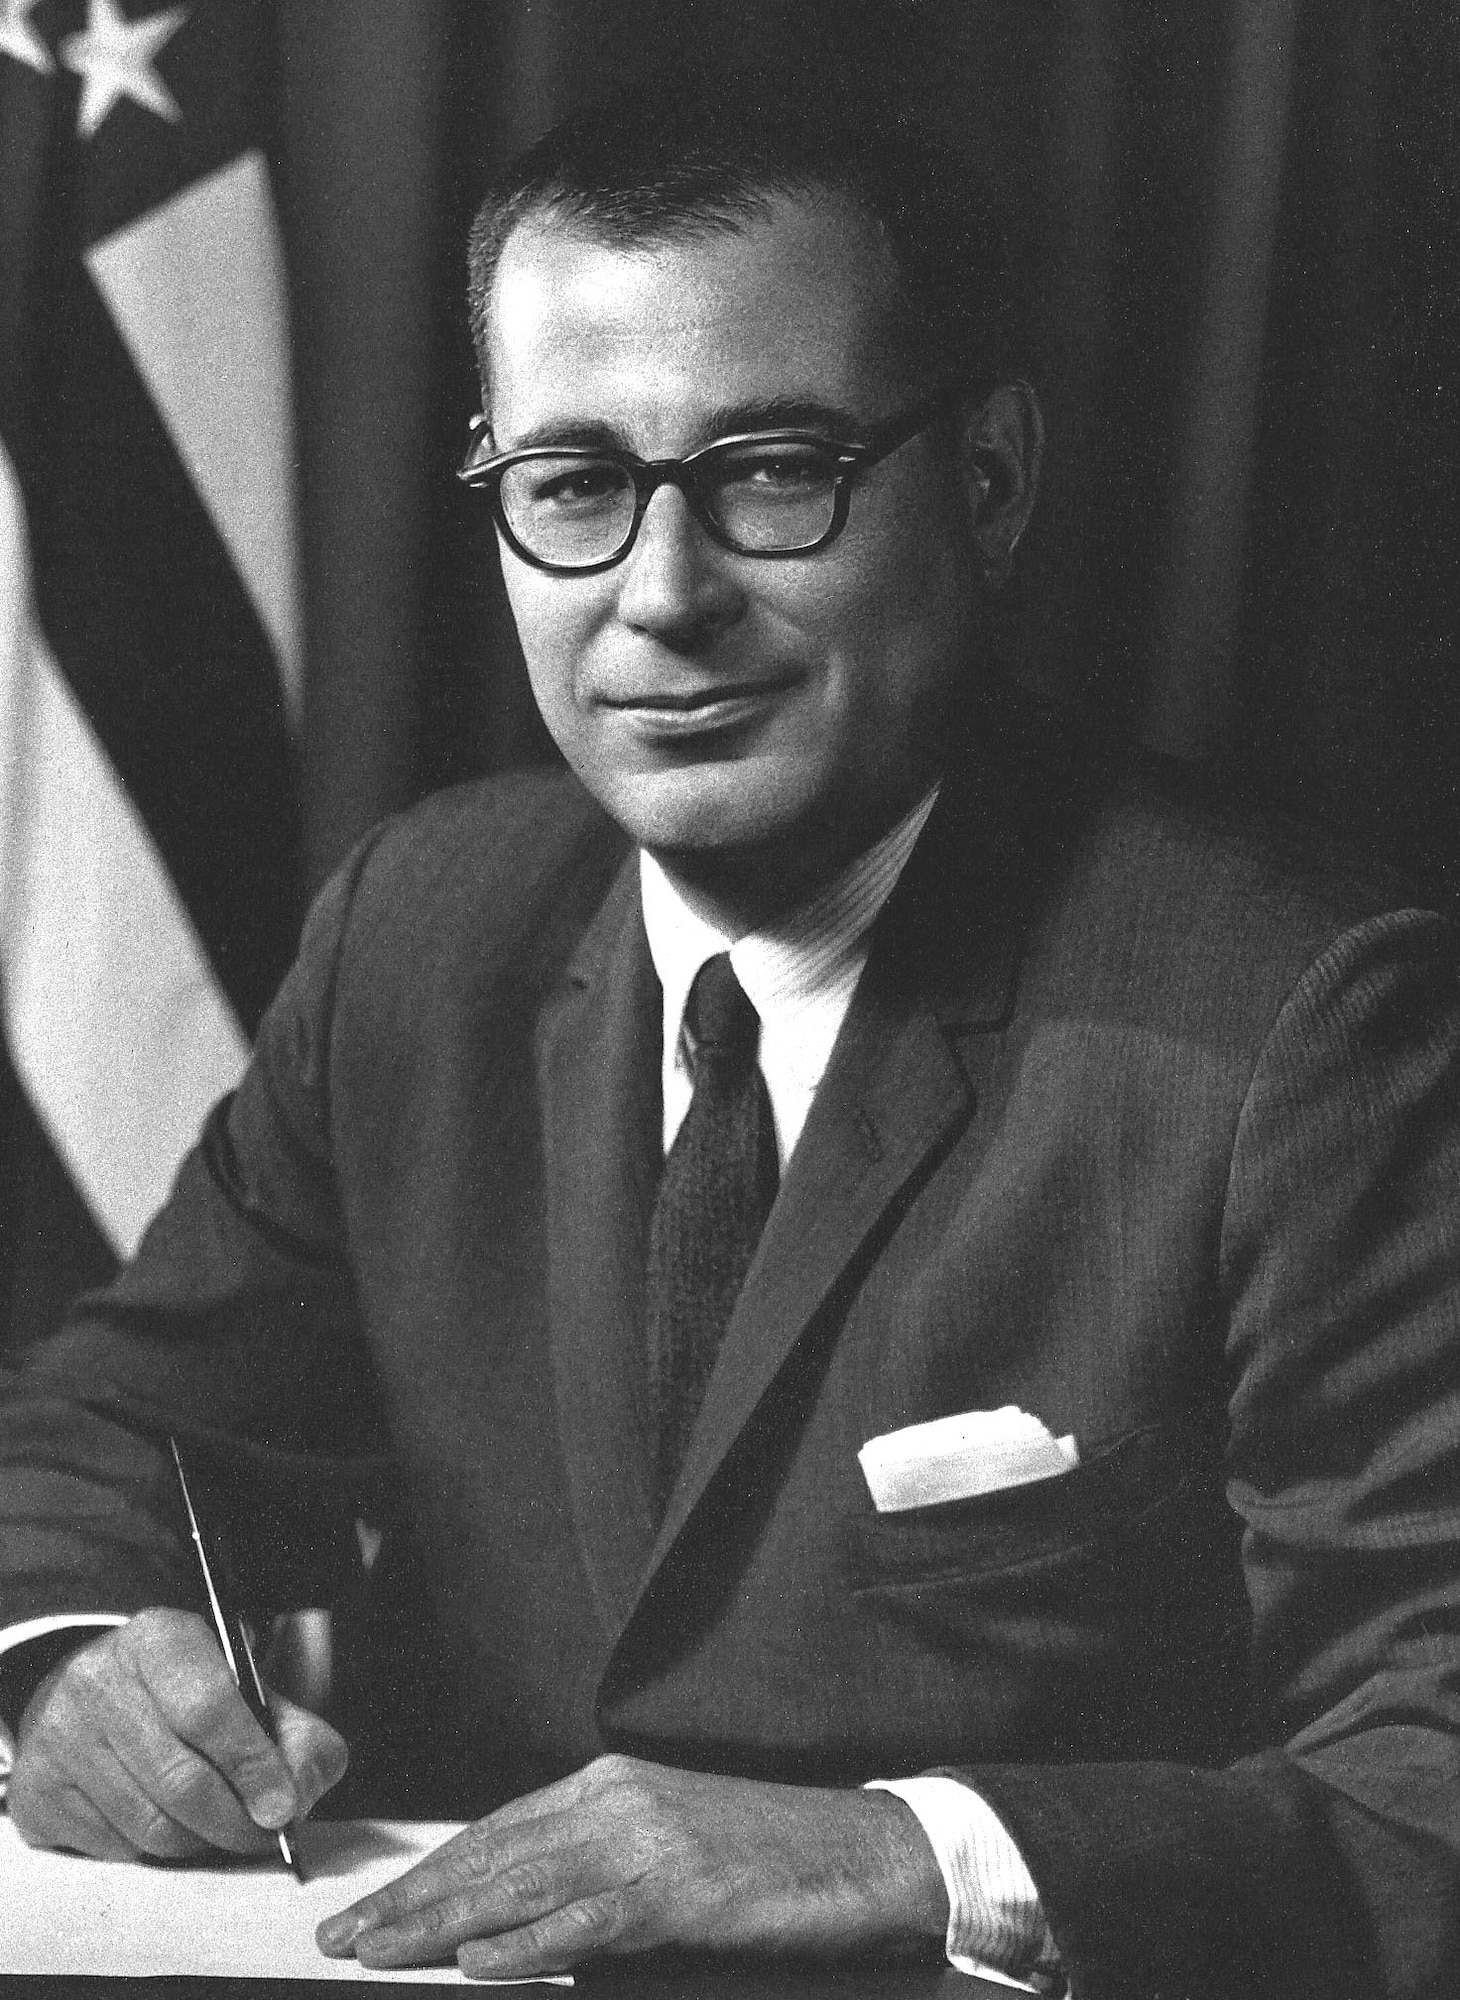 Harold Brown, the 14th secretary of defense who also served as the nation’s 8th secretary of the Air Force, died Jan. 4 at his home in Ranch Santa Fe, California. He was 91.